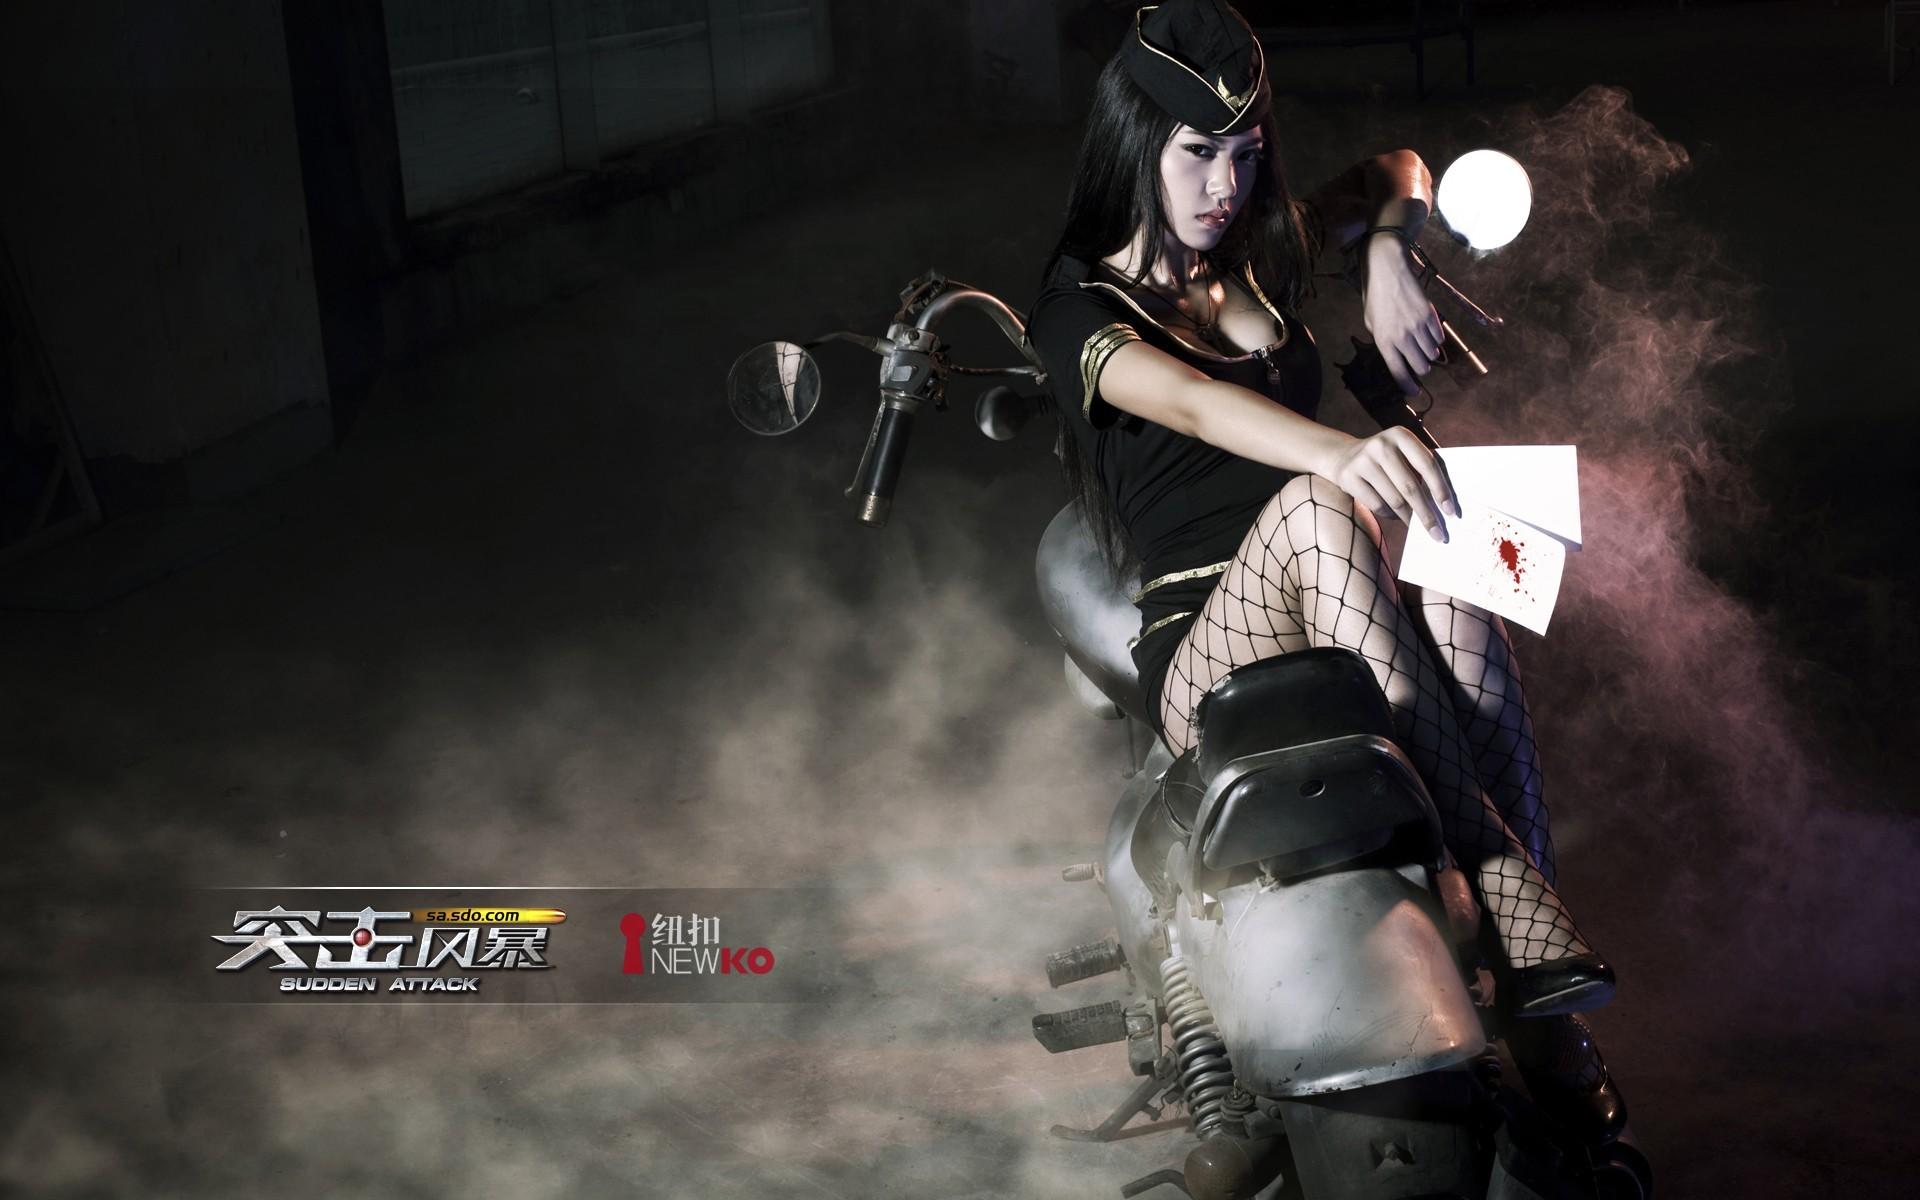 Sudden attack 2 Picture - Image Abyss